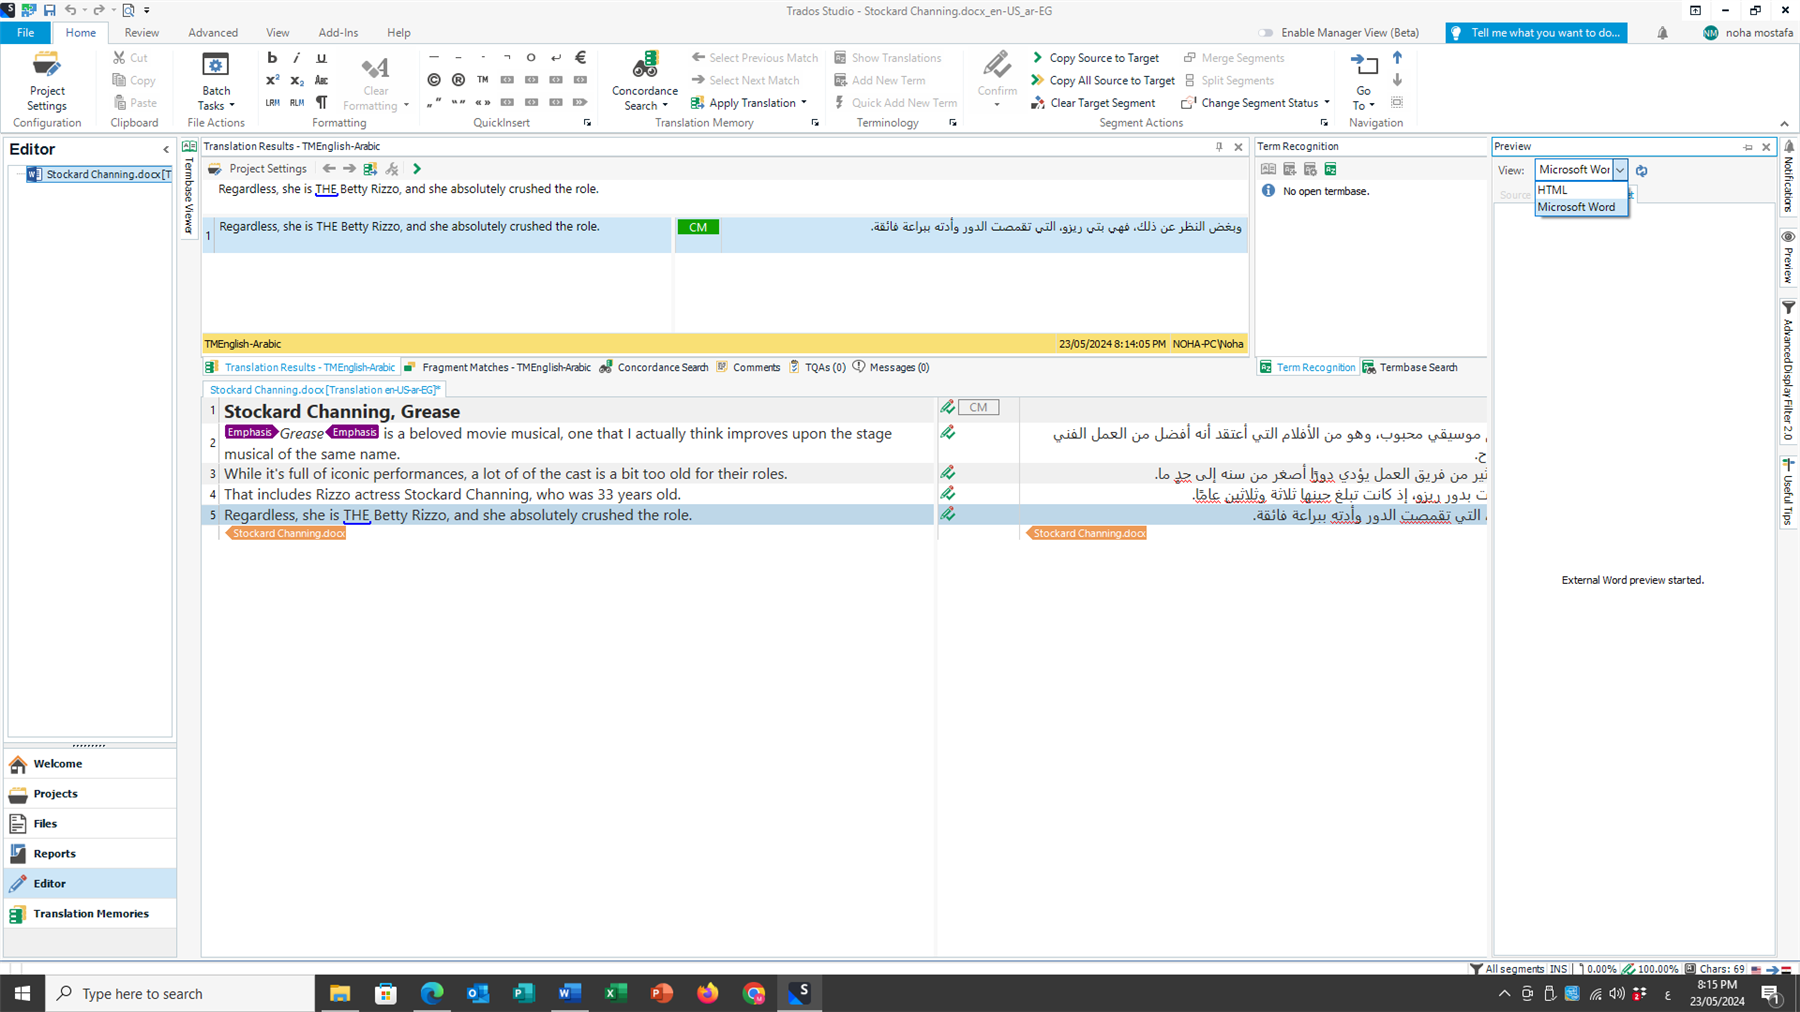 Screenshot of Trados Studio software showing a translation project from English to Arabic. The Translation Results pane is open with text selected. A message at the bottom right indicates 'External Word preview started.'